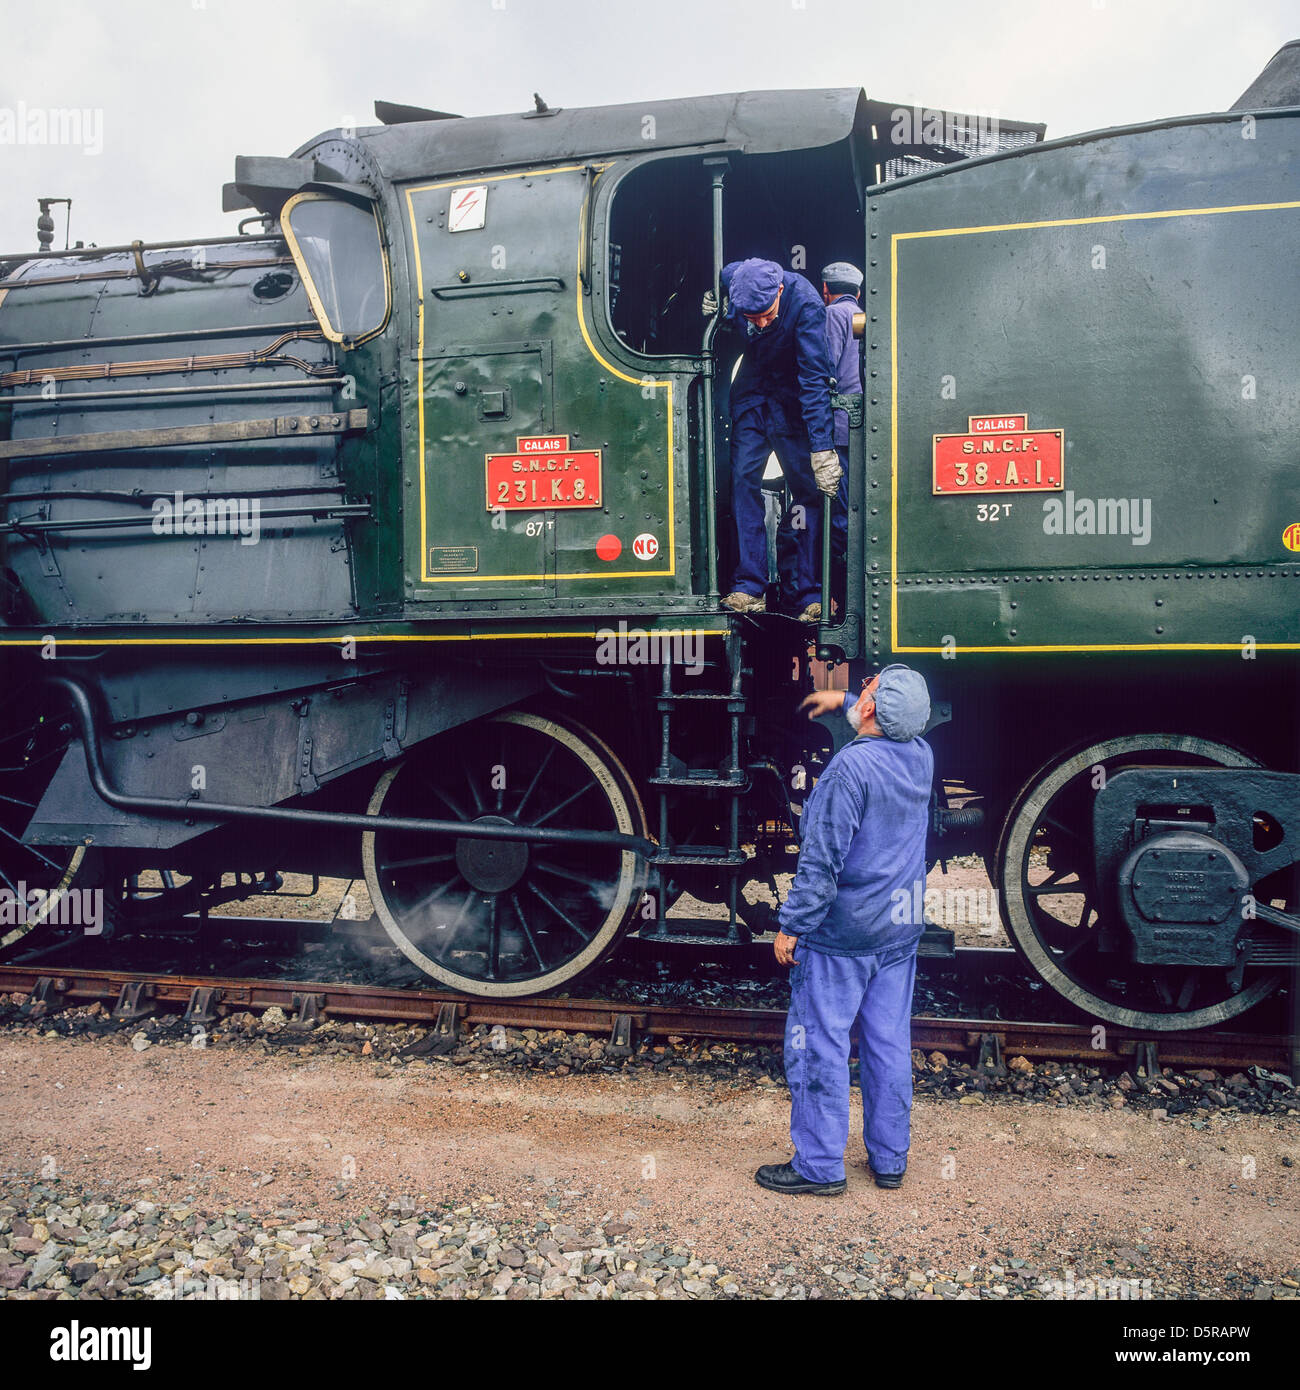 Engineers with historic steam locomotive 'Pacific PLM 231 K 8' of 'Paimpol-Pontrieux' train Brittany France Stock Photo